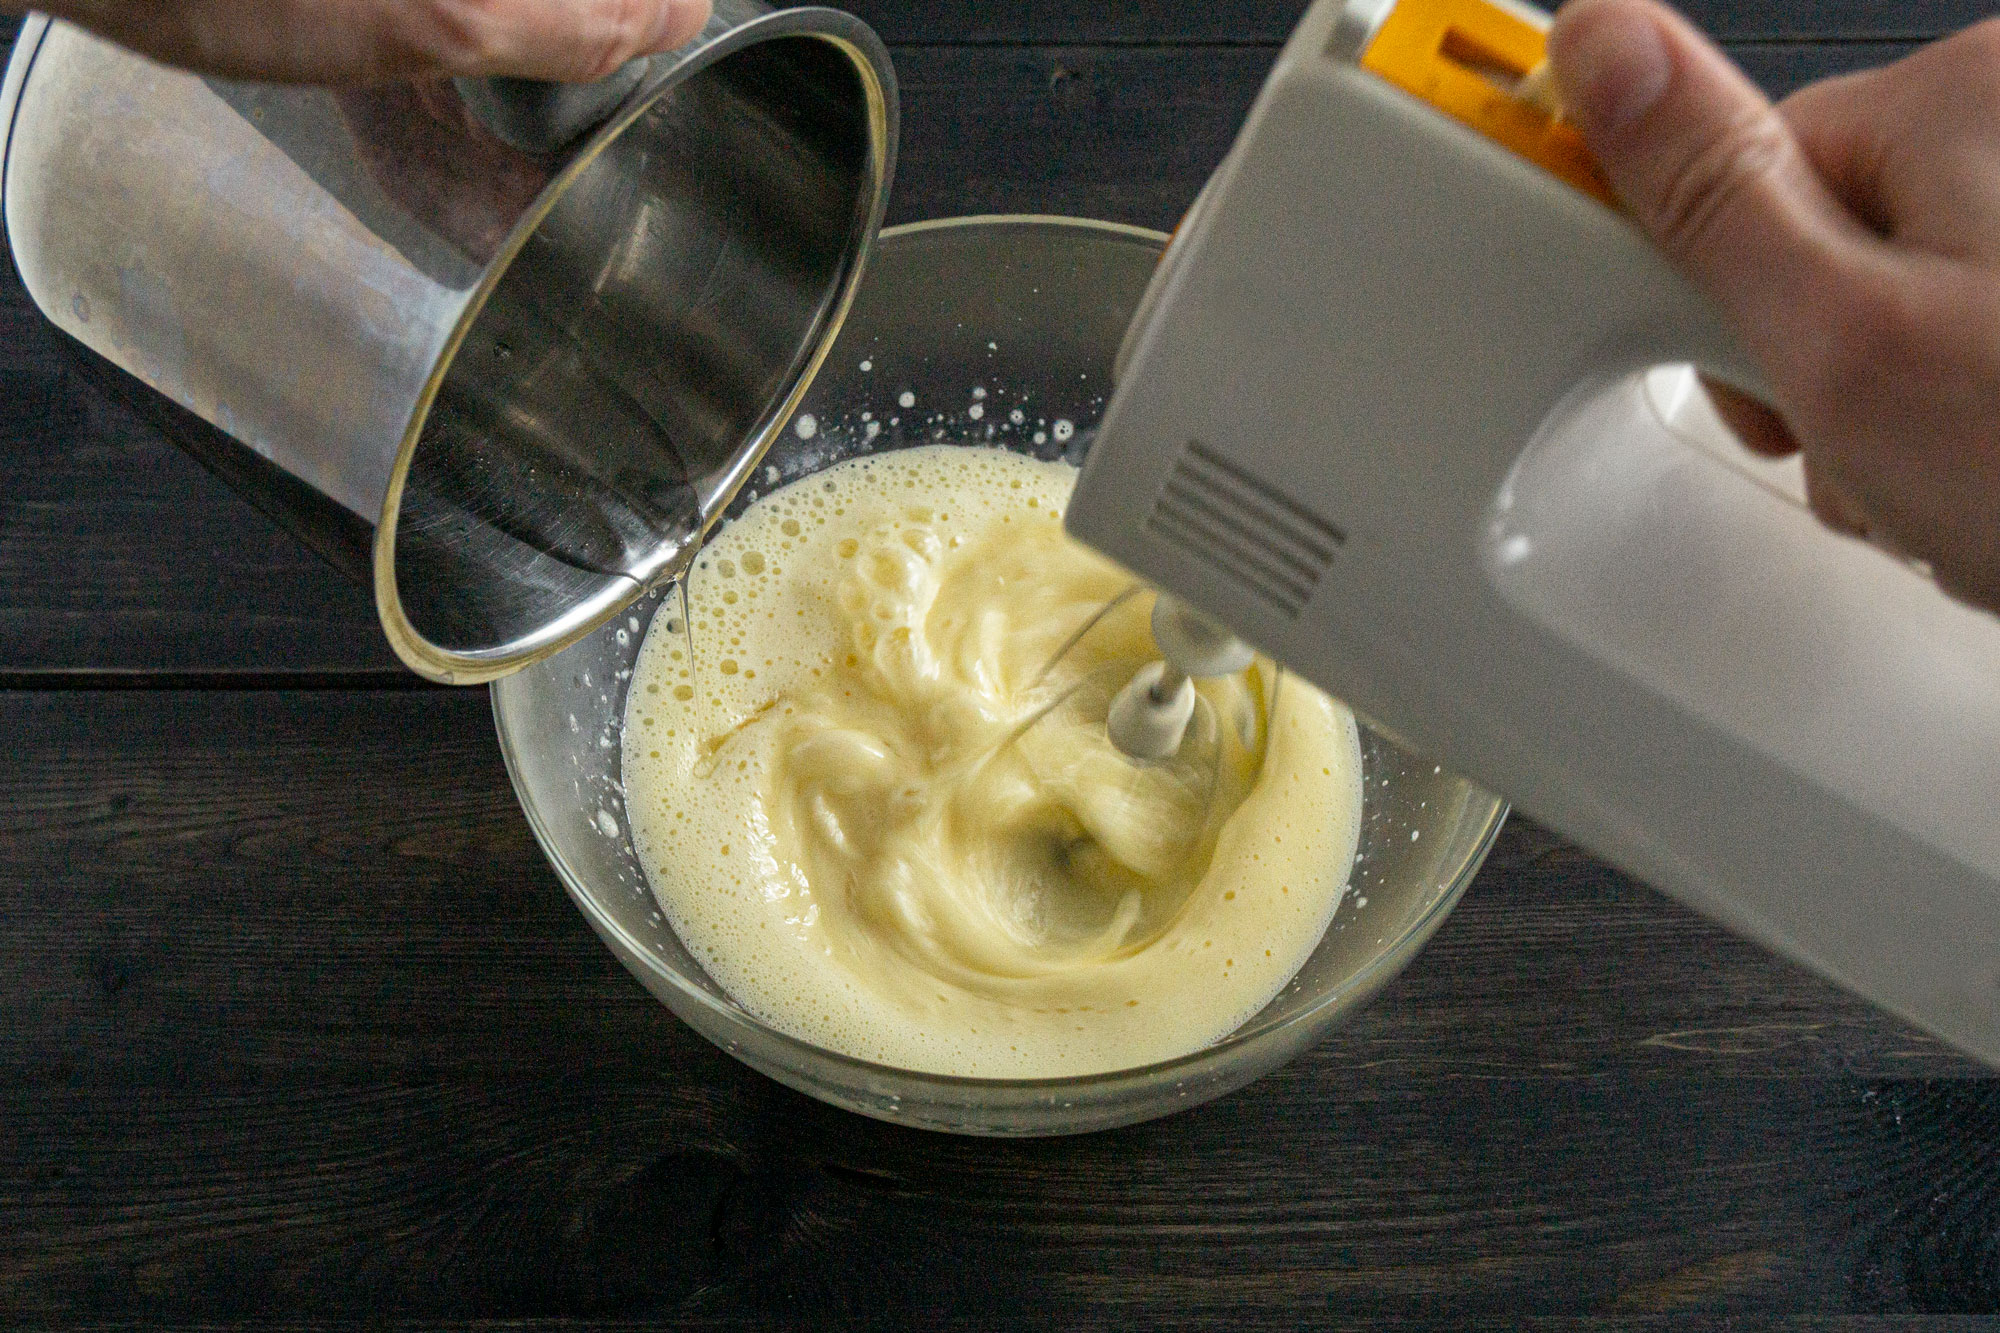 Drizzling sugar syrup into the egg yolks